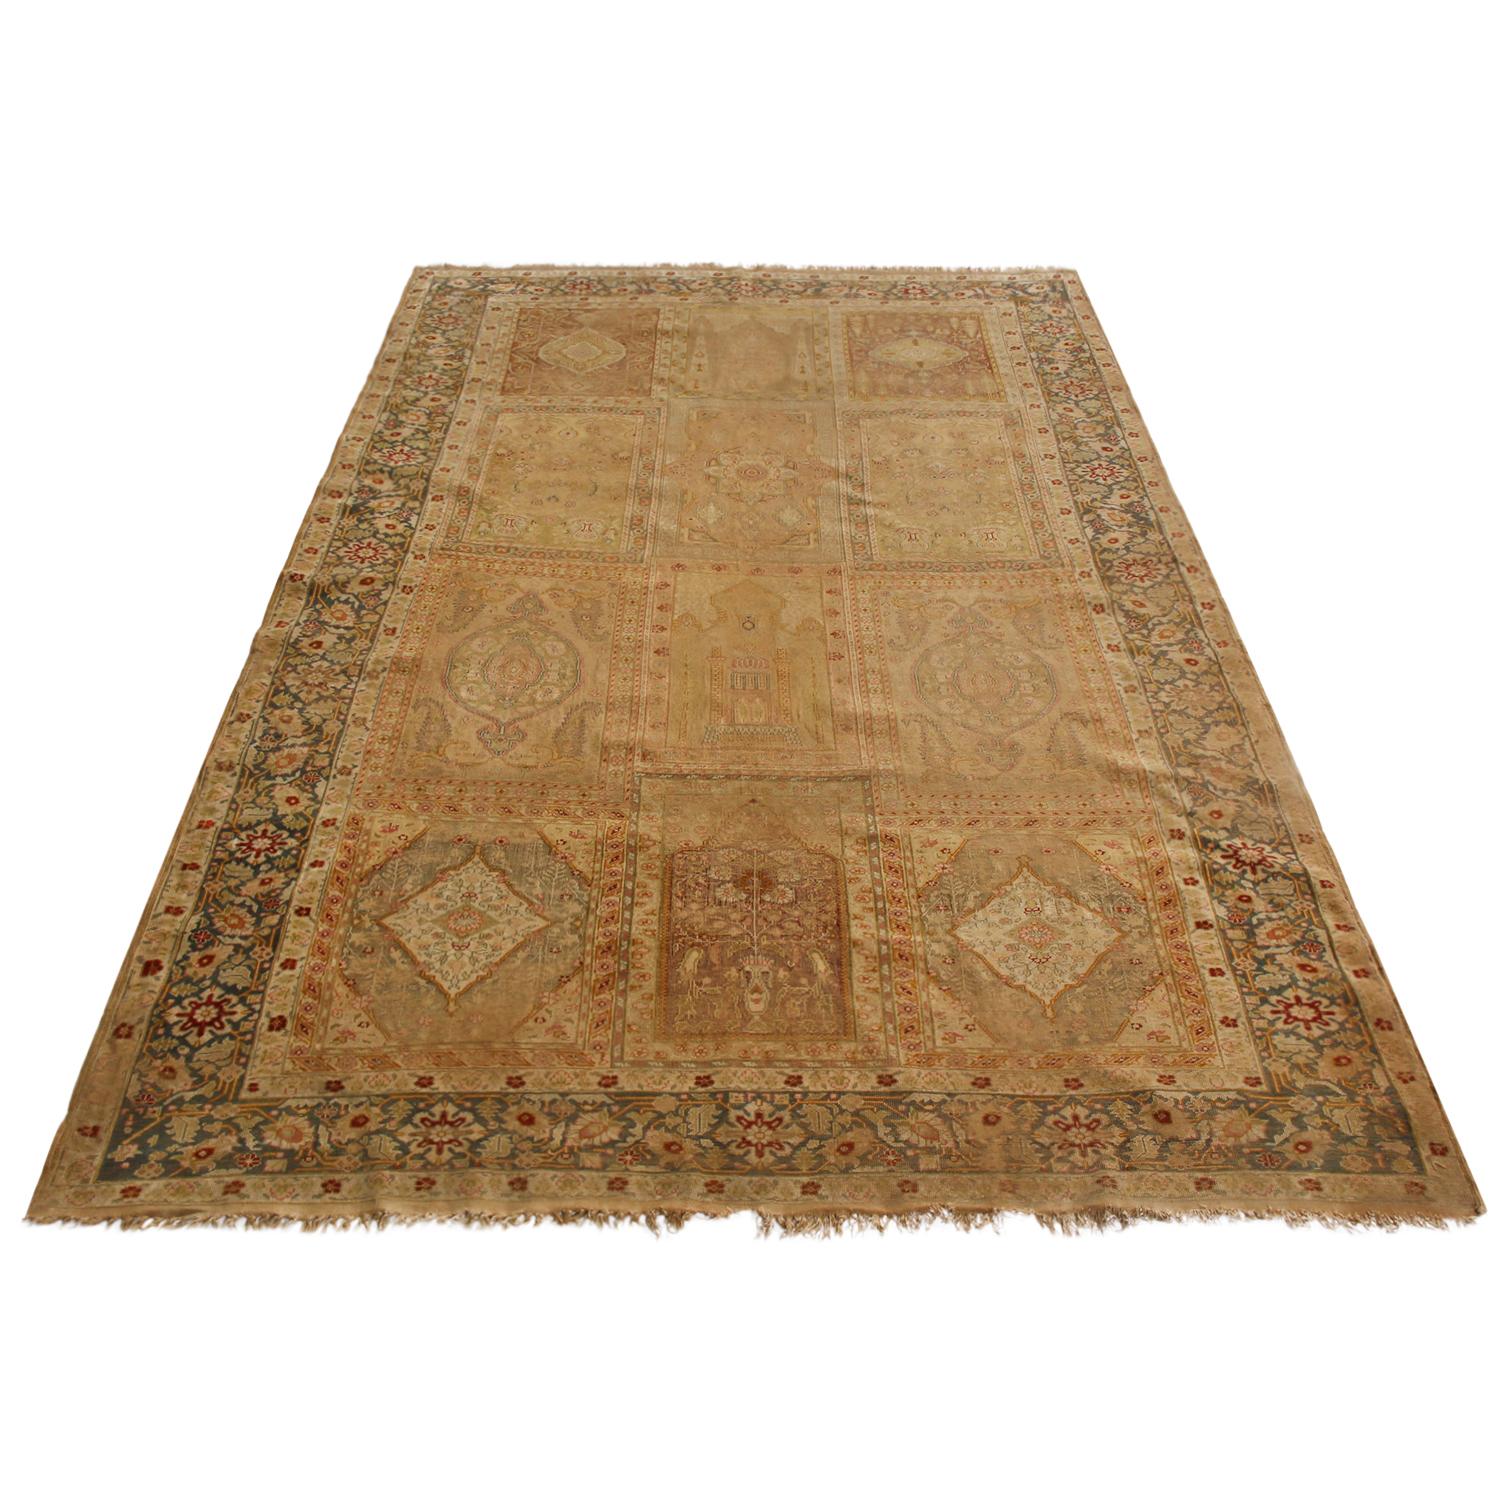 Hand knotted in naturally luminous silk originating from Turkey between 1870-1880, this antique Kayseri rug enjoys a stylistically impressive garden design in multi-tonal beige and mauve colorways, accented both in the tile frame and border patterns